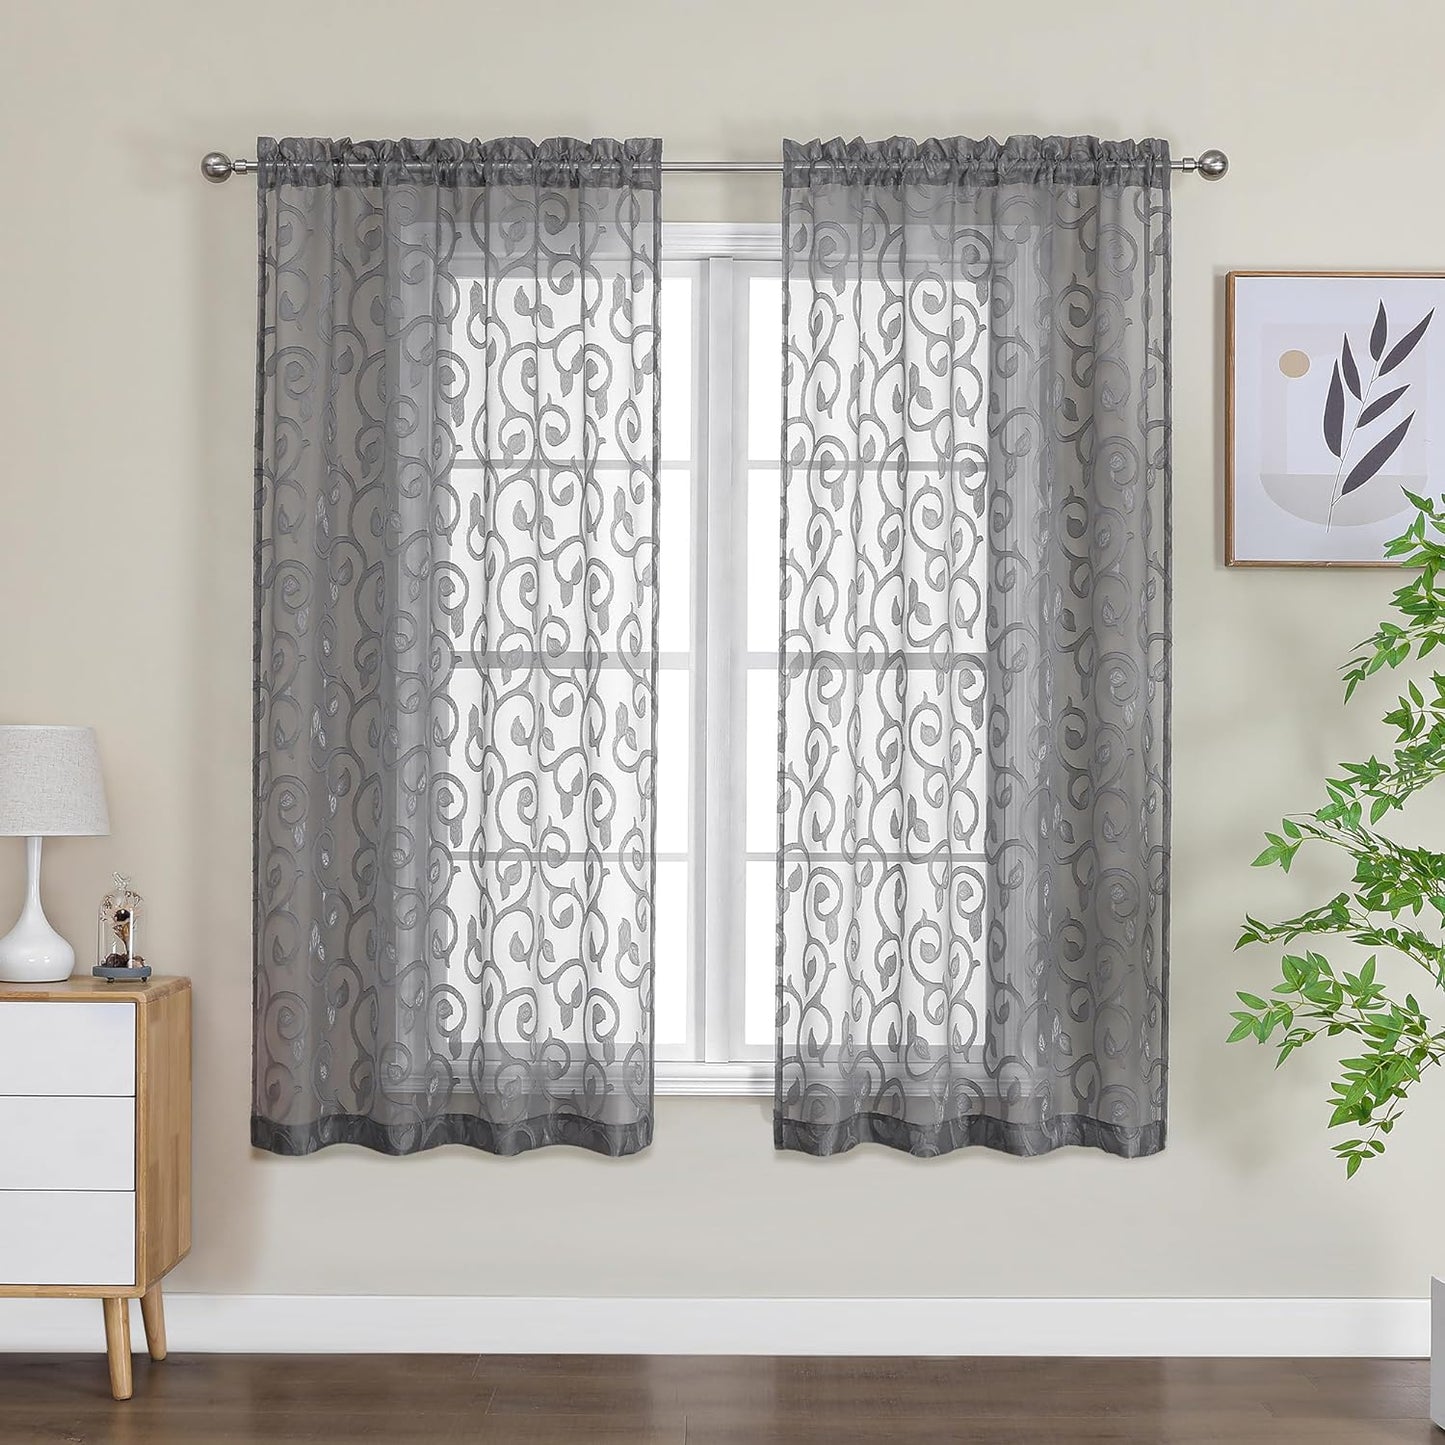 OWENIE Furman Sheer White Curtains 84 Inches Long for Bedroom Living Room 2 Panels Set, White Curtains Jacquard Clip Light Filtering Semi Sheer Curtain Transparent Rod Pocket Window Drapes, 2 Pcs  OWENIE Charcoal Gray 40W X 63L 